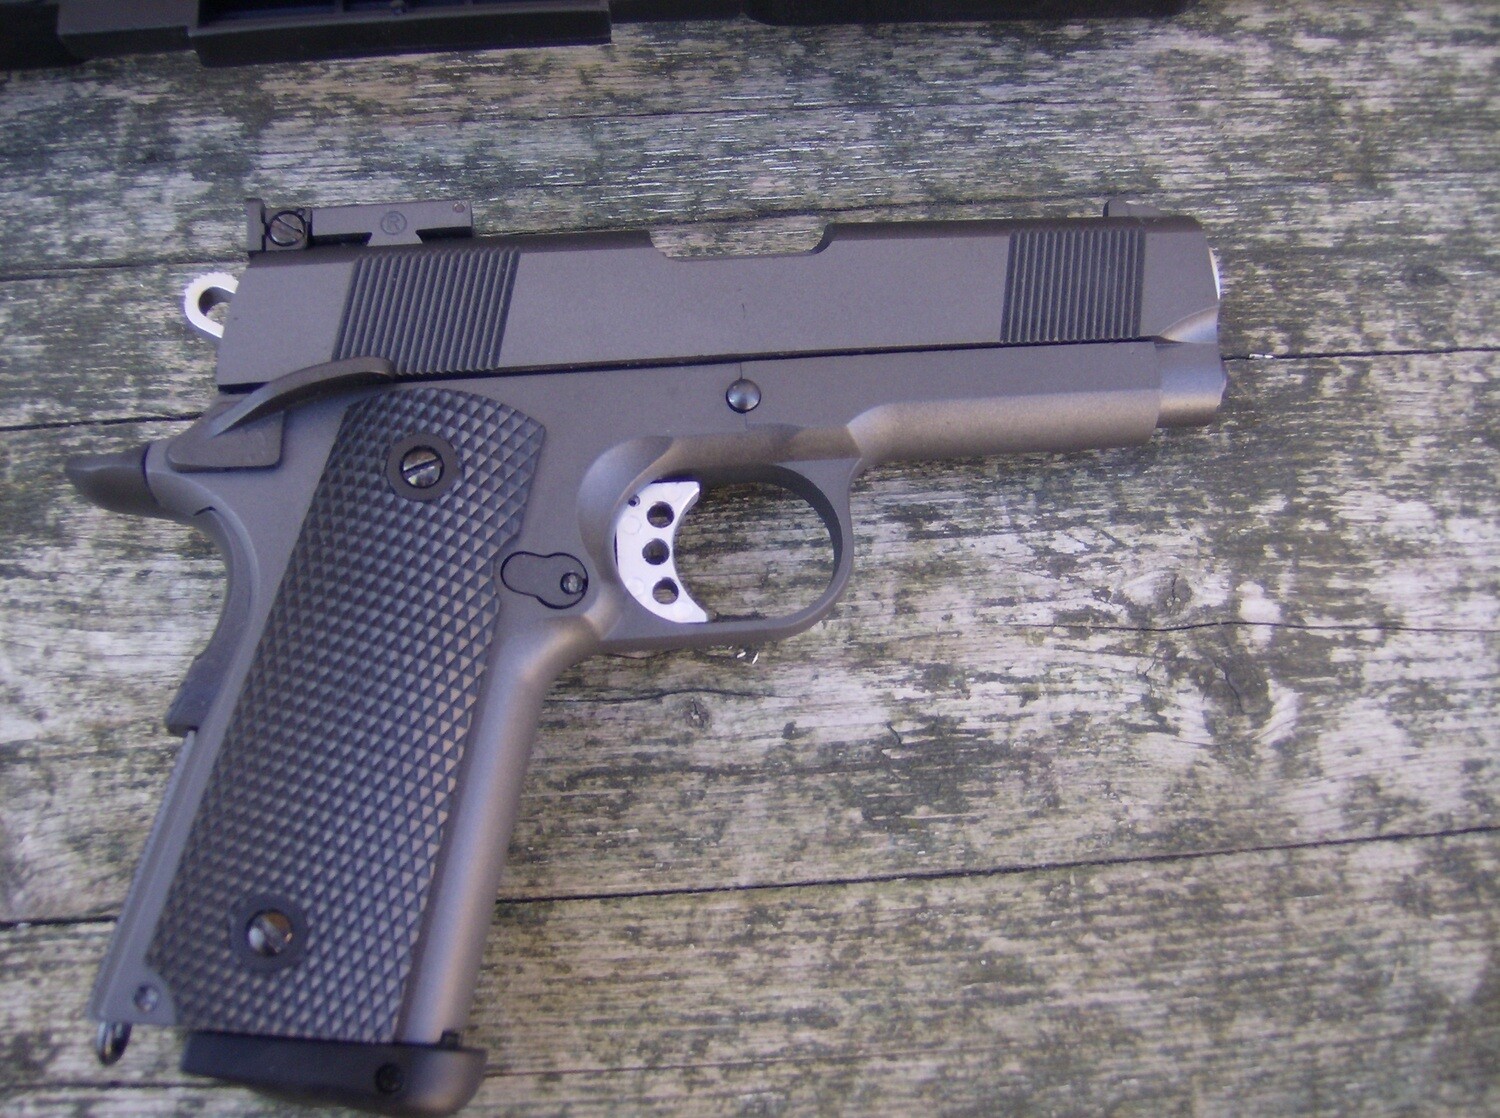 Well Colt 1911 compact g 193,full metal, 6mm,co2 power, blow back.